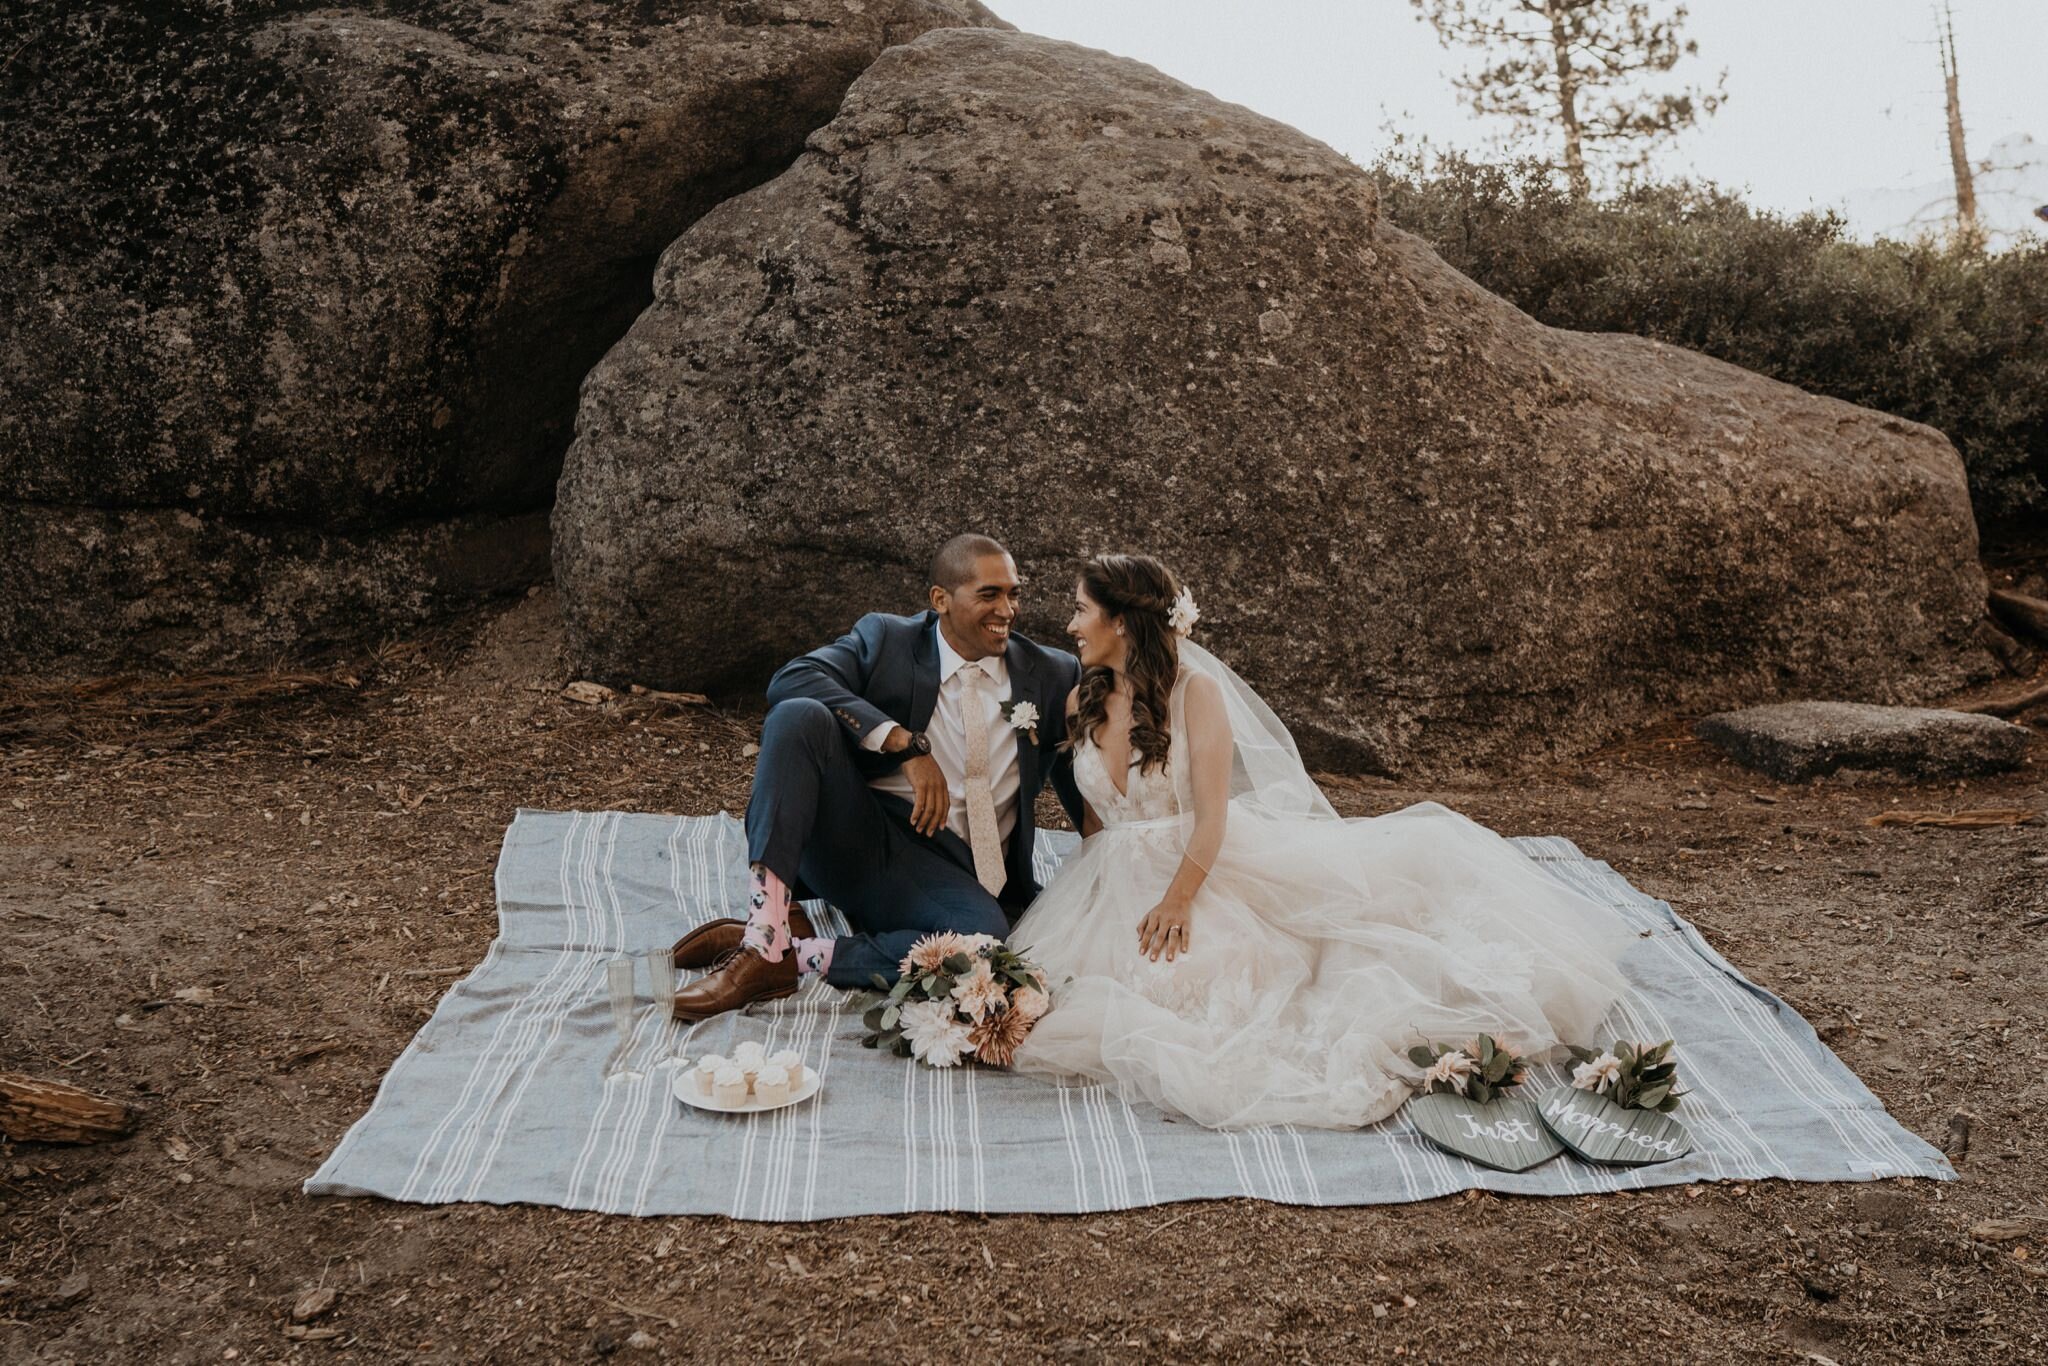 Cute picnic for wedding at Yosemite National Park elopement and wedding photos at Glacier Point during sunrise with view of Half Dome